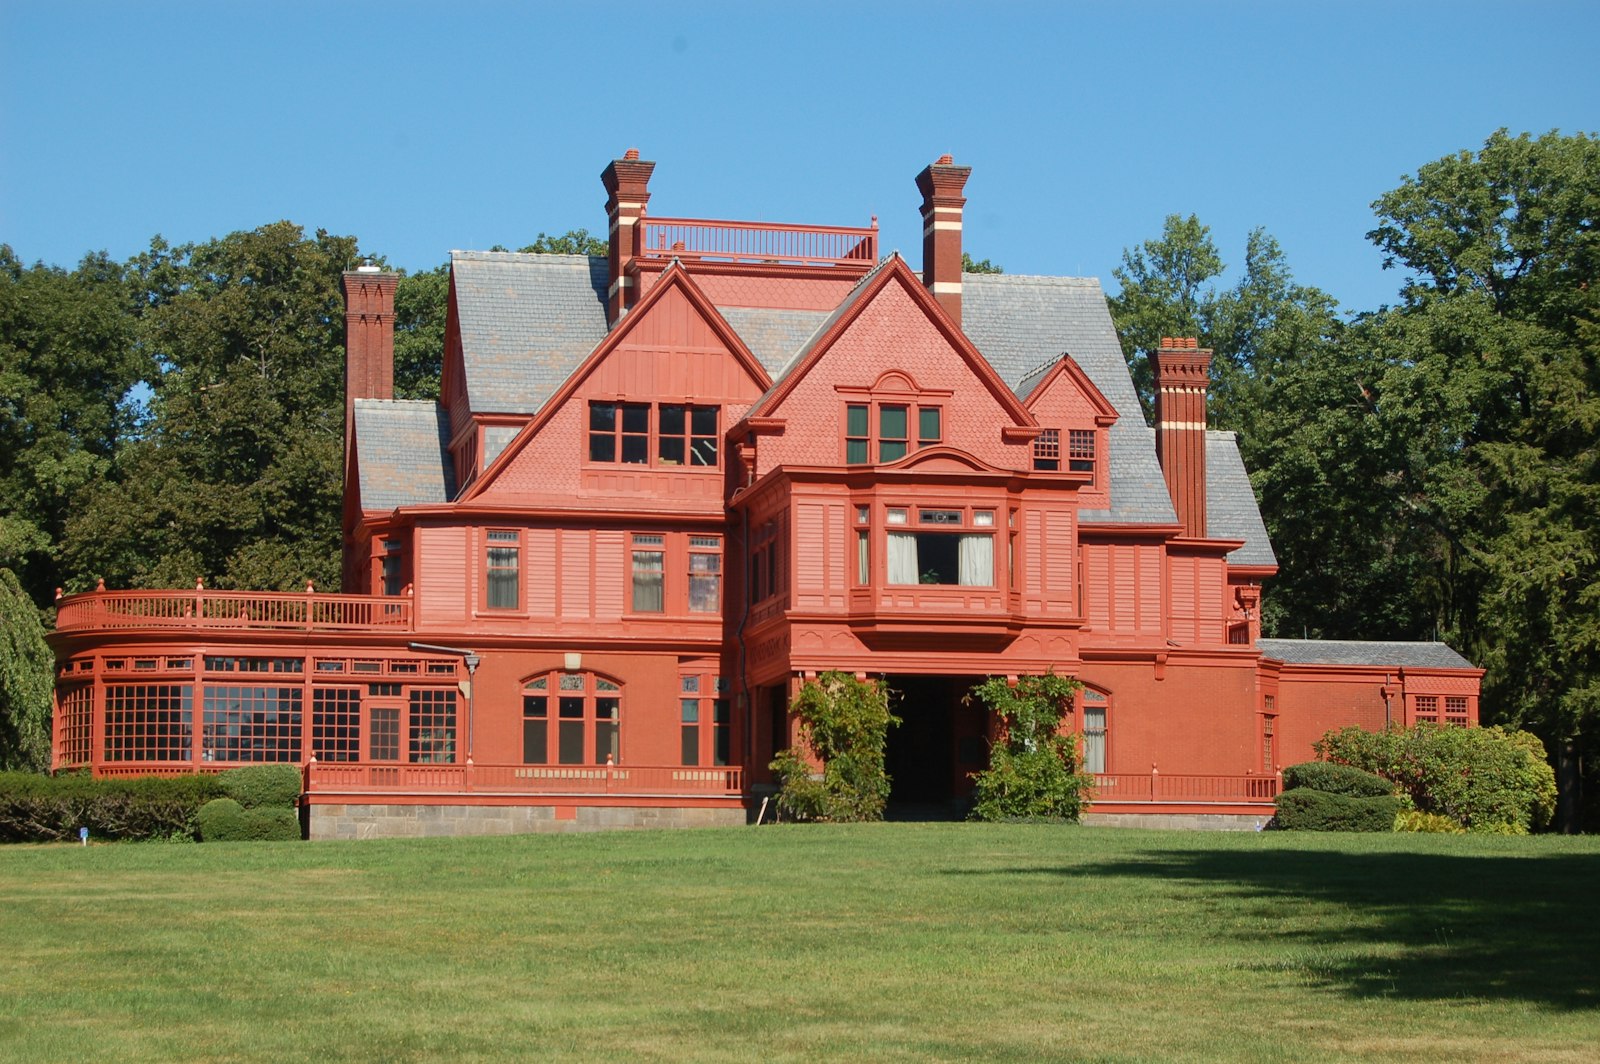 Large salmon colored mansion with several gabled roofs.